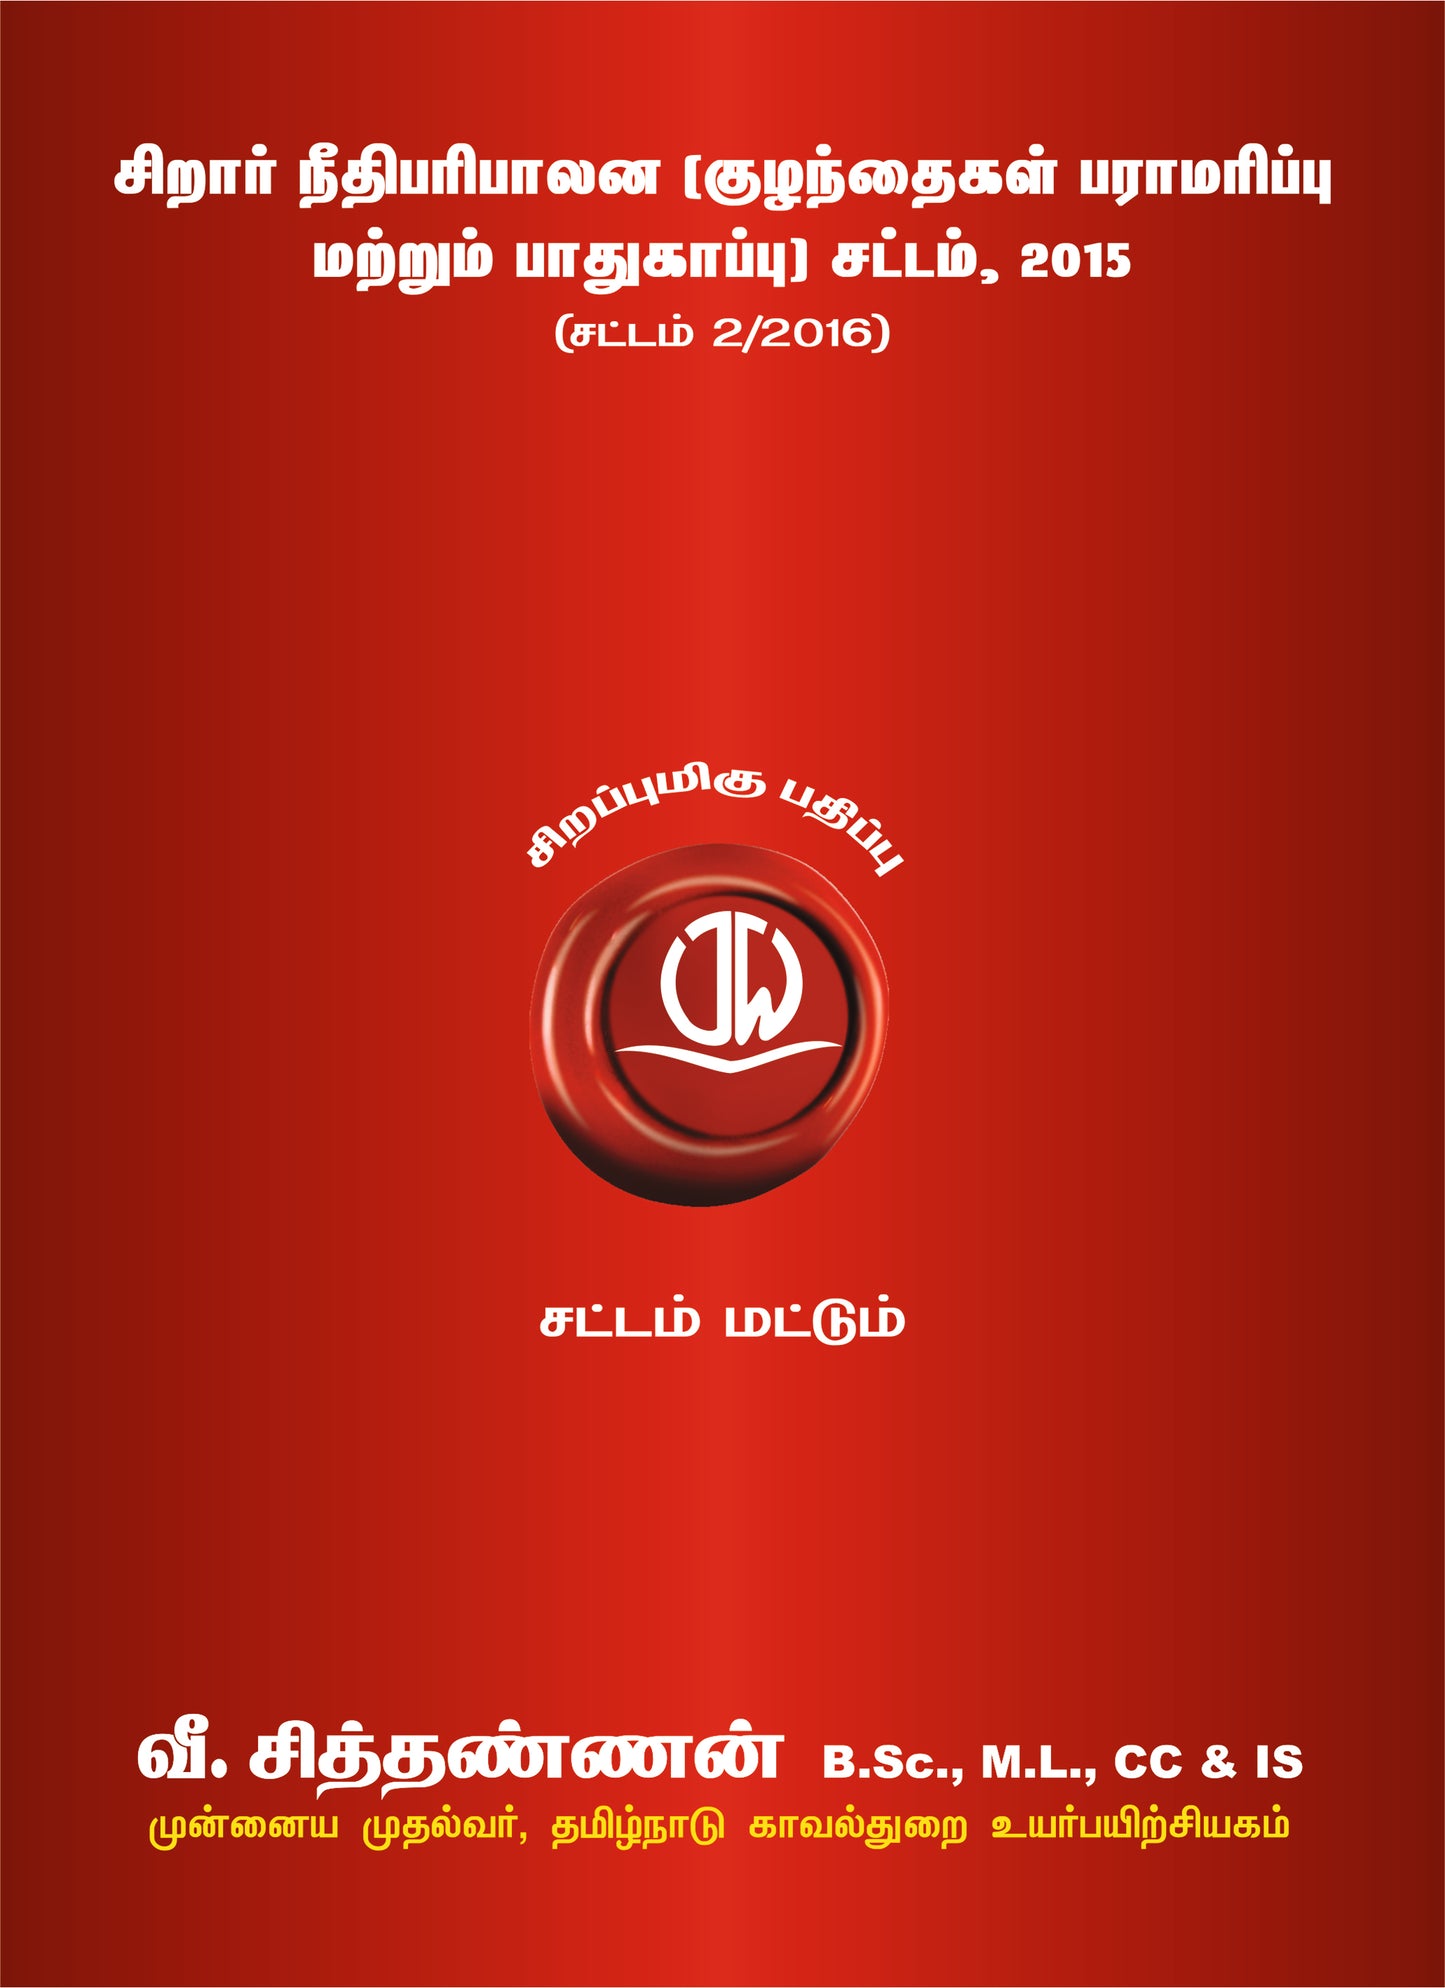 In Tamil - Juvenile Justice (Care and Protection of Children) Act